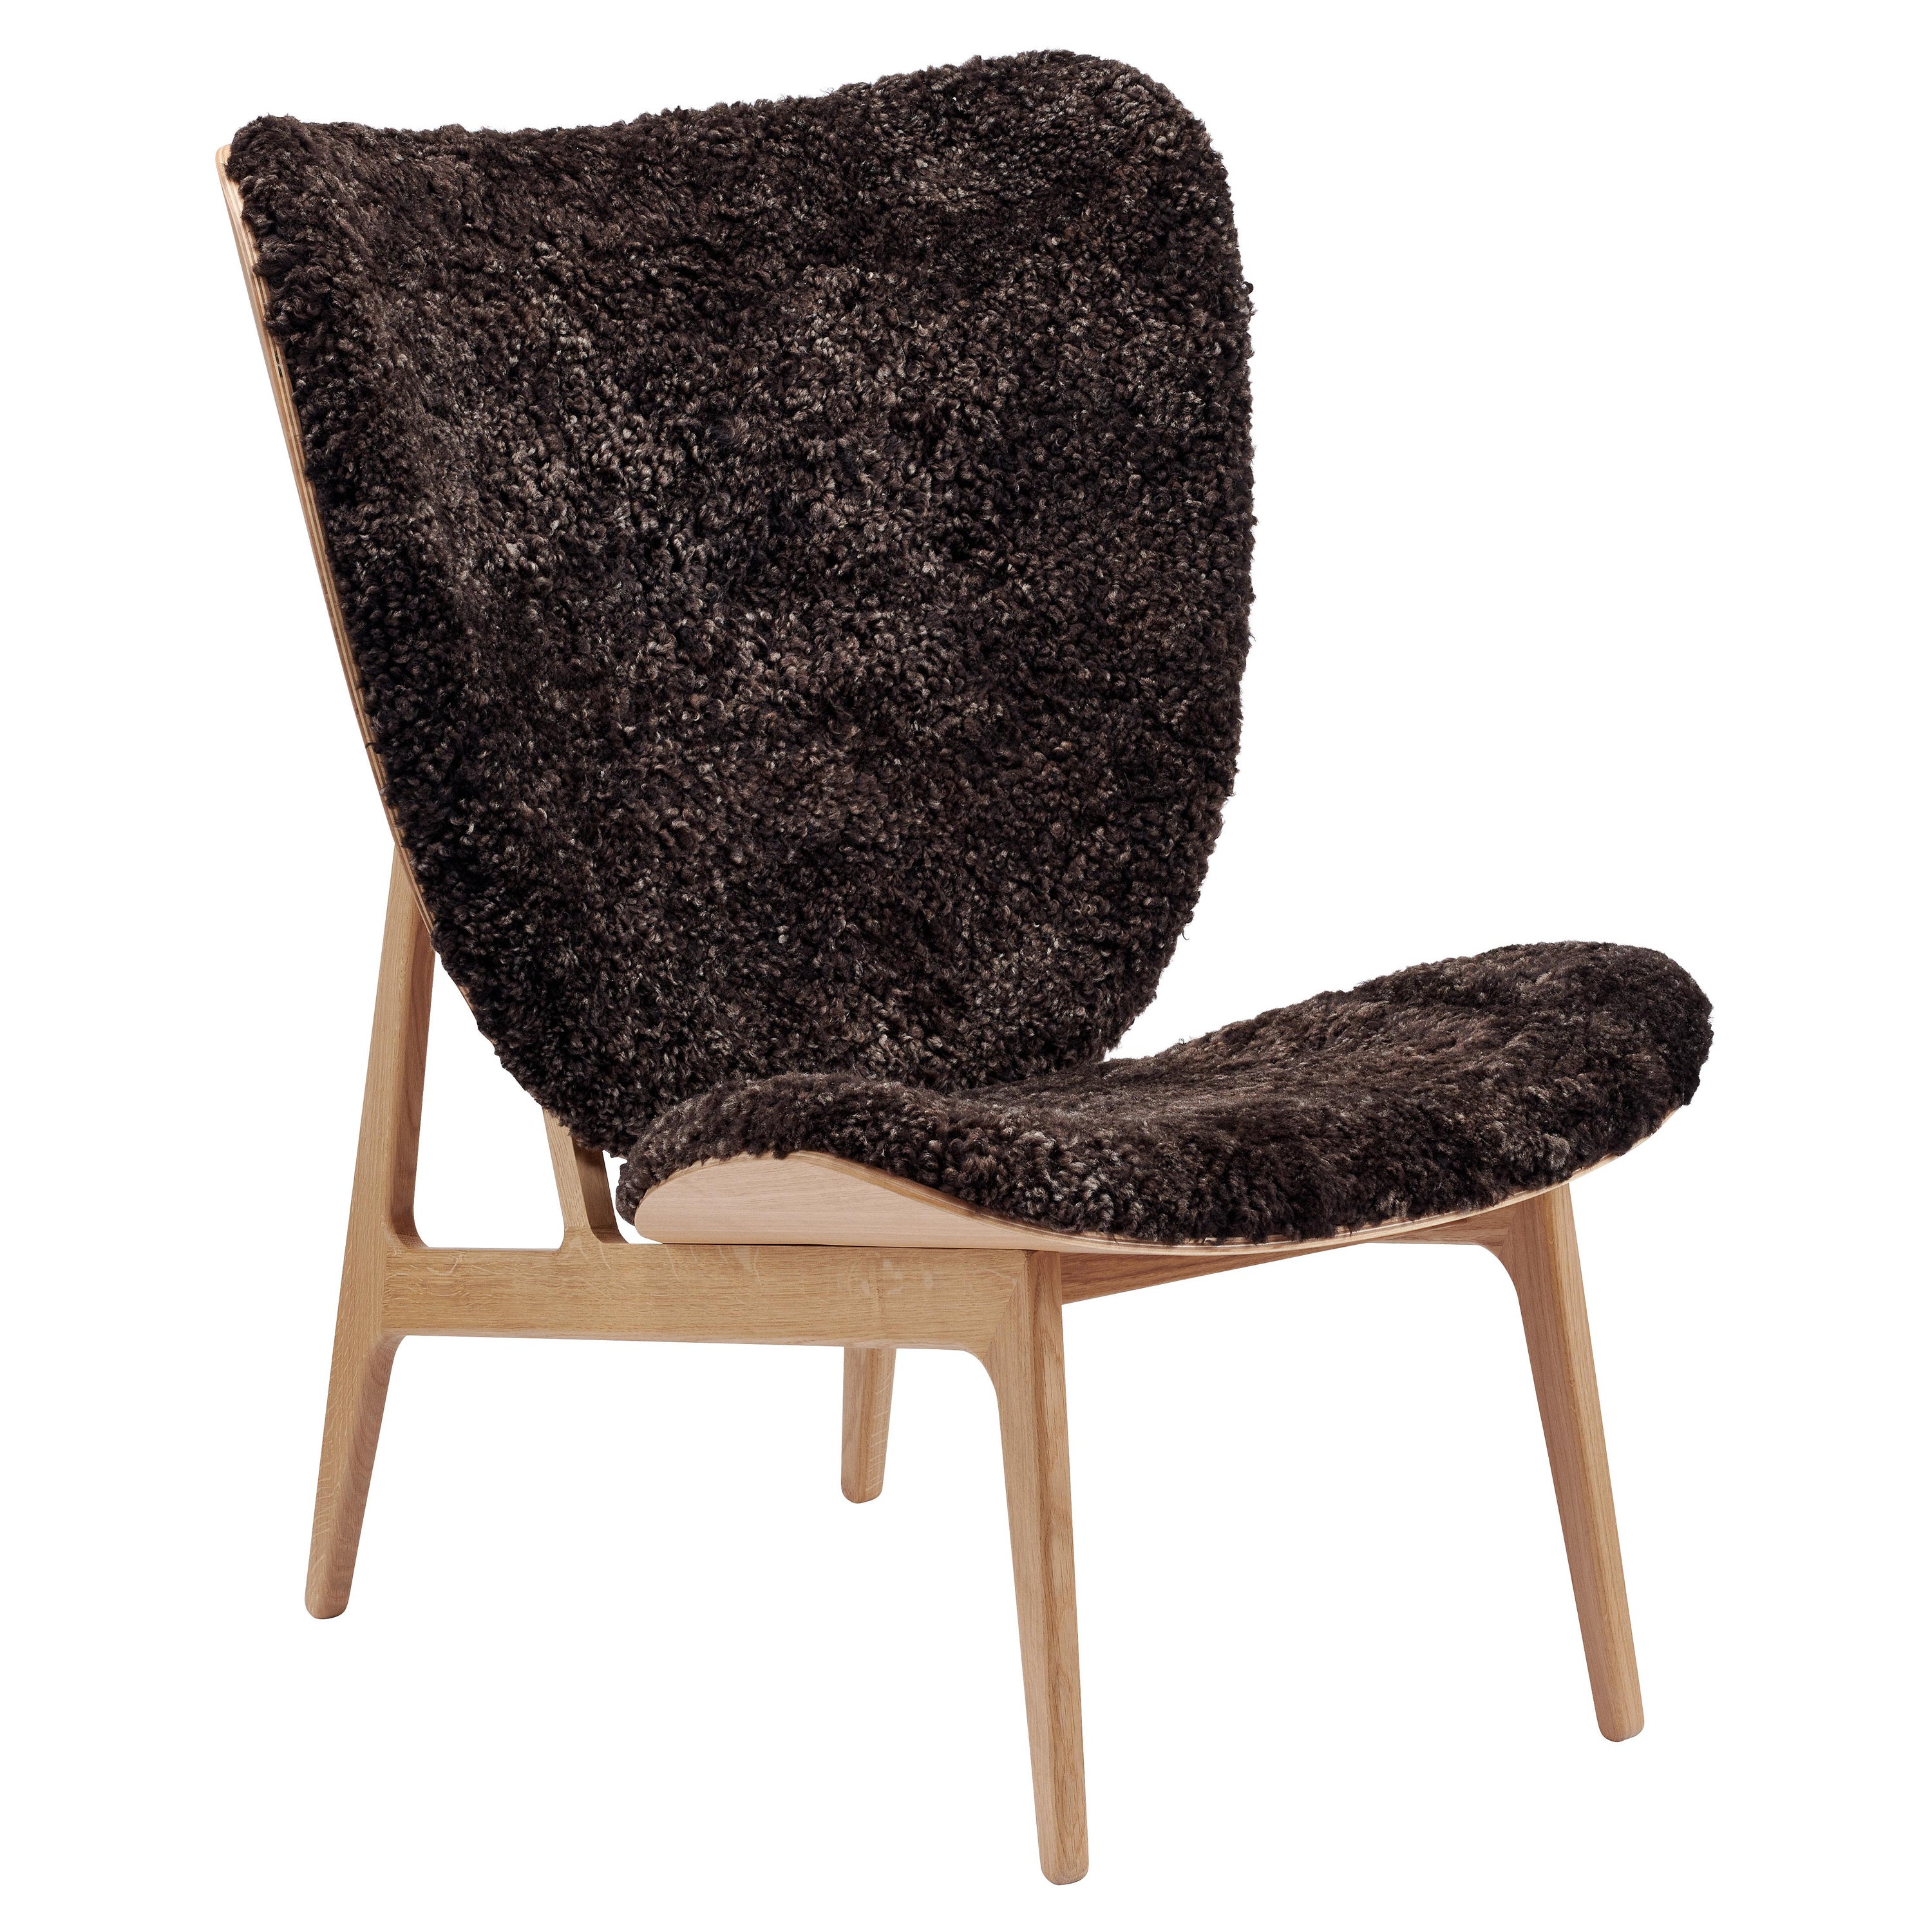 'Elephant' Wooden Lounge Chair by Norr11, Natural Oak, Sheepskin For Sale